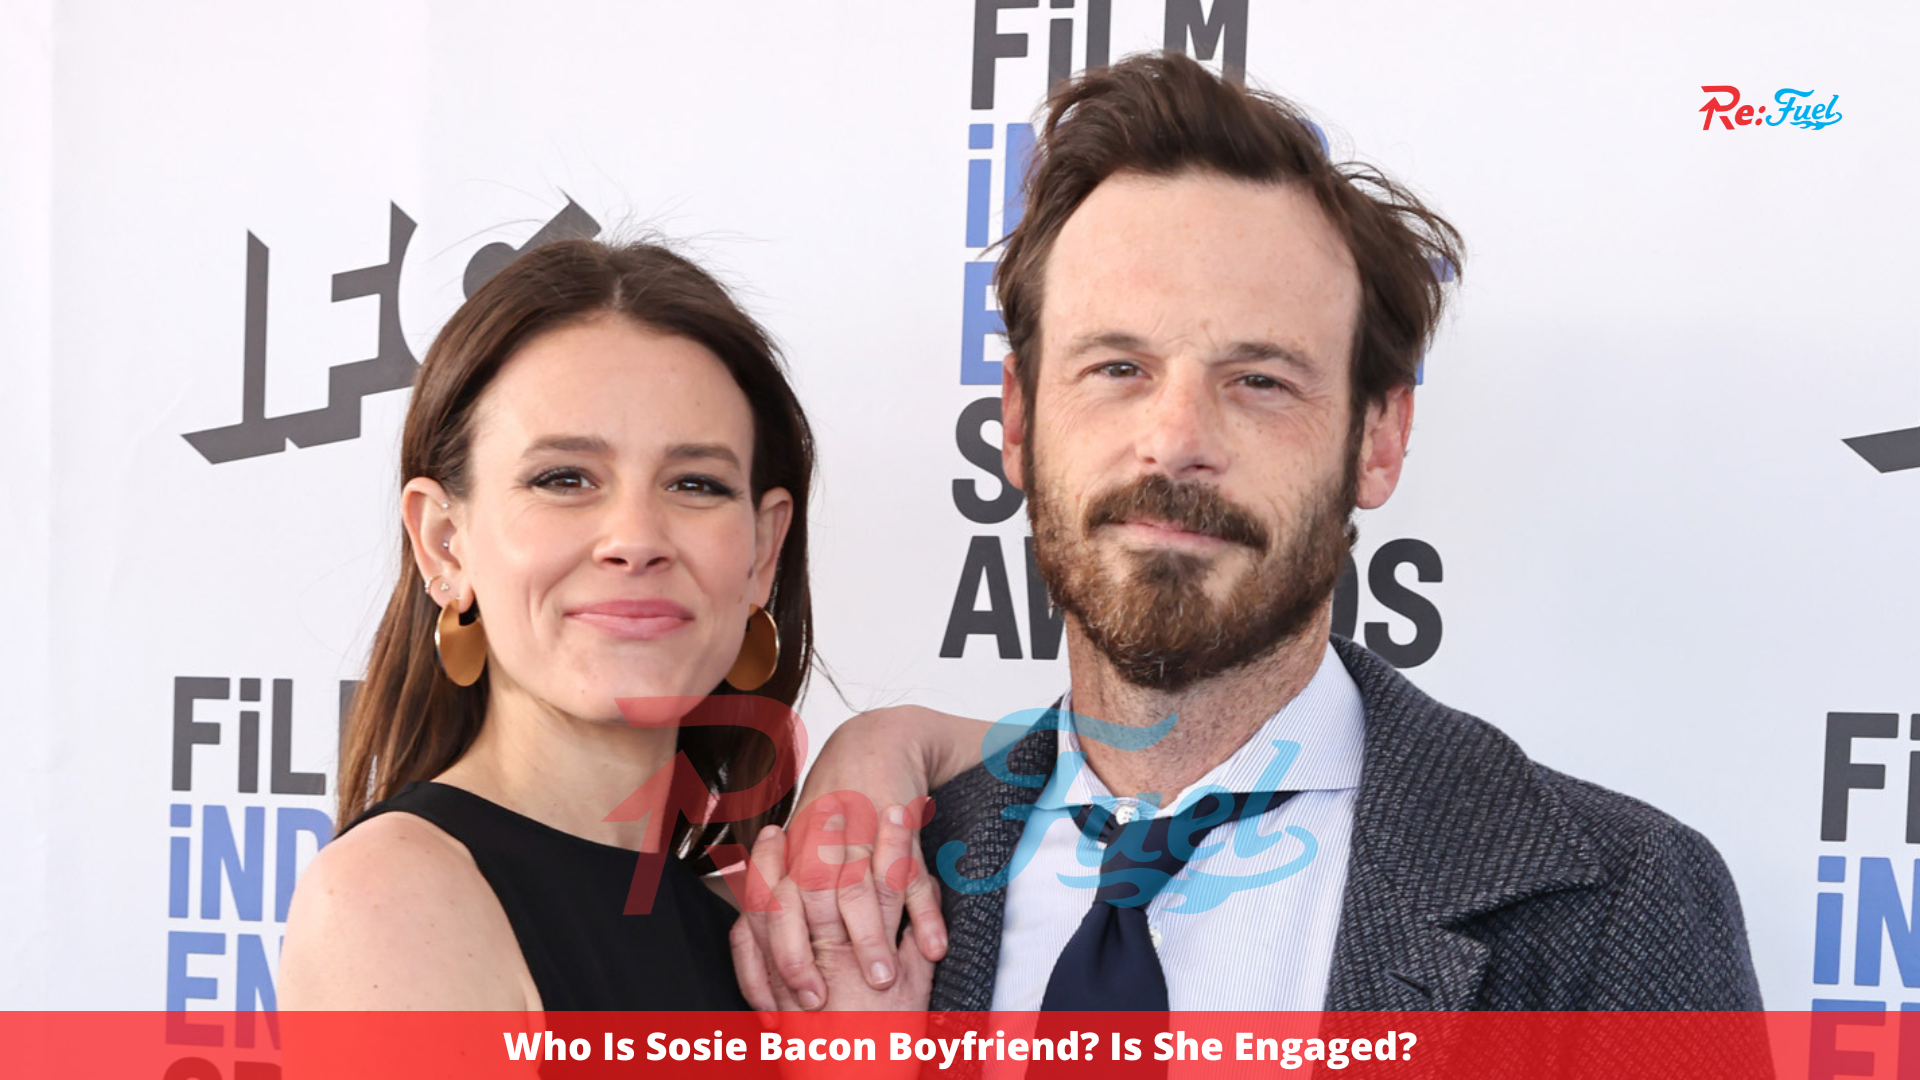 Who Is Sosie Bacon Boyfriend? Is She Engaged?